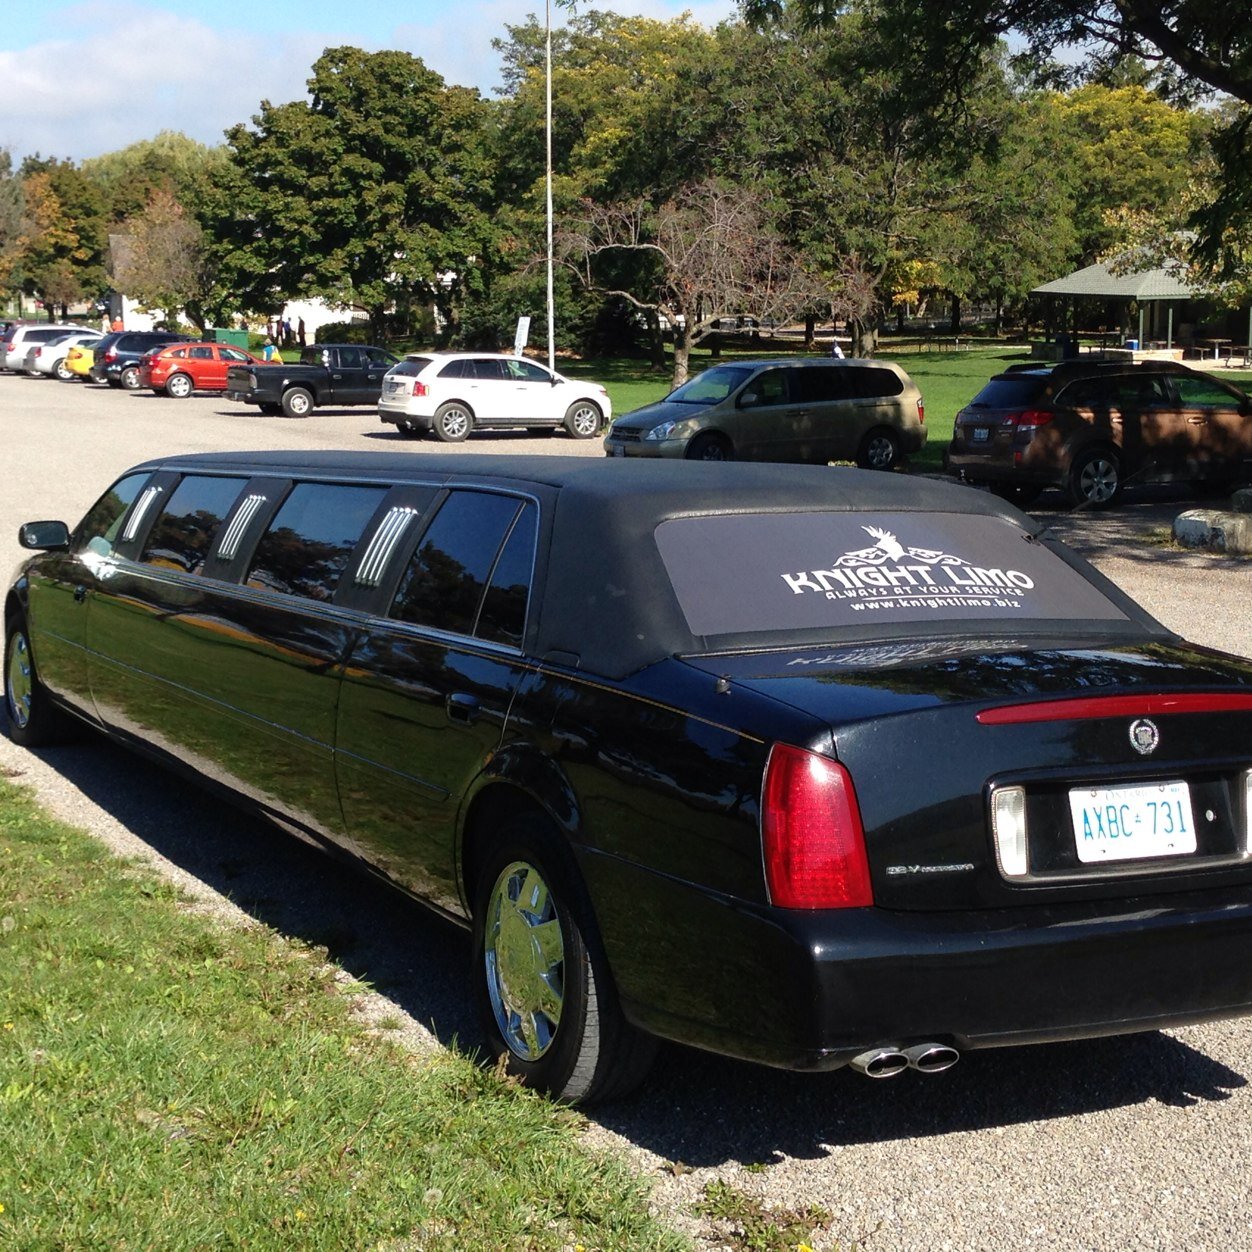 Brantford's #1 limousine service provider. Winner of the Brant News Reader's Choice awards for best limo service in Brantford & Brant County 2014-2015!